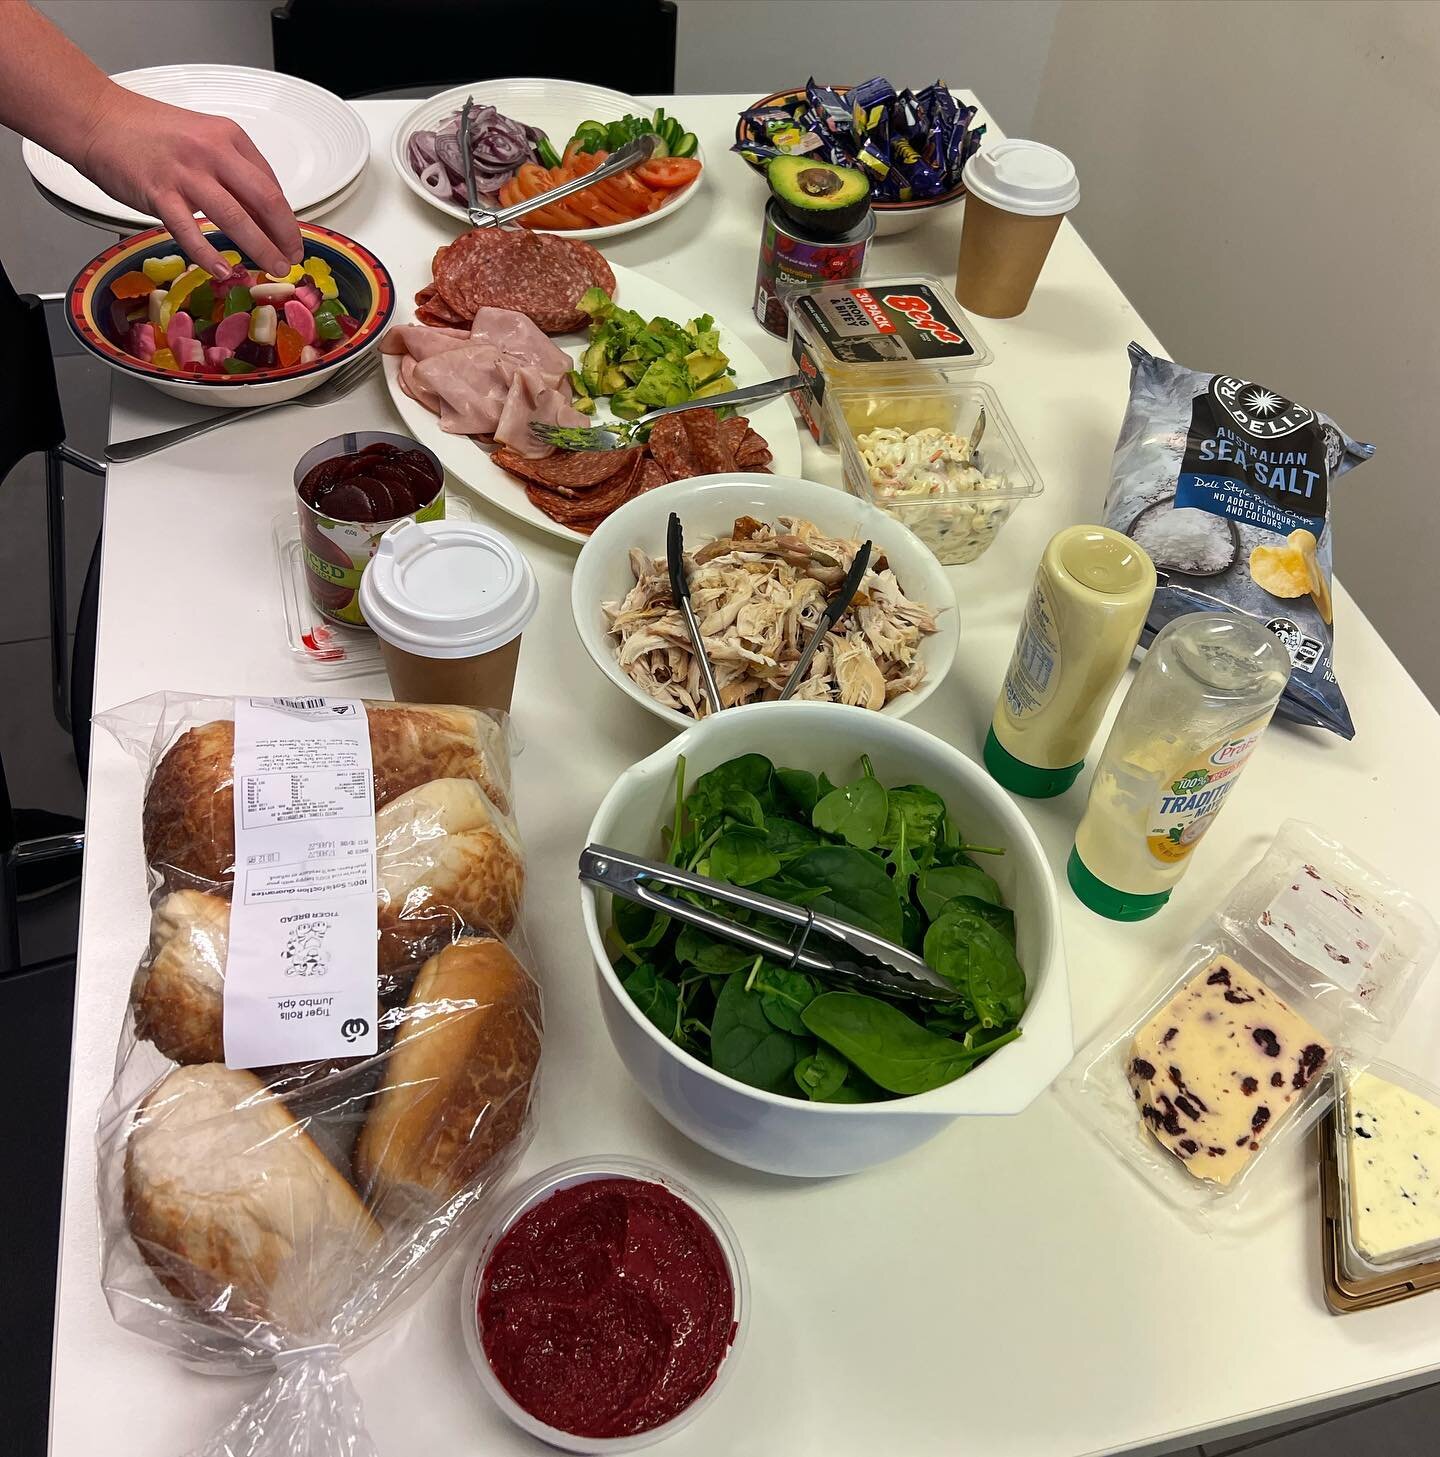 Friday lunches at PPC! Got to keep the energy up for the Friday afternoons. #physio #fresh #delicious